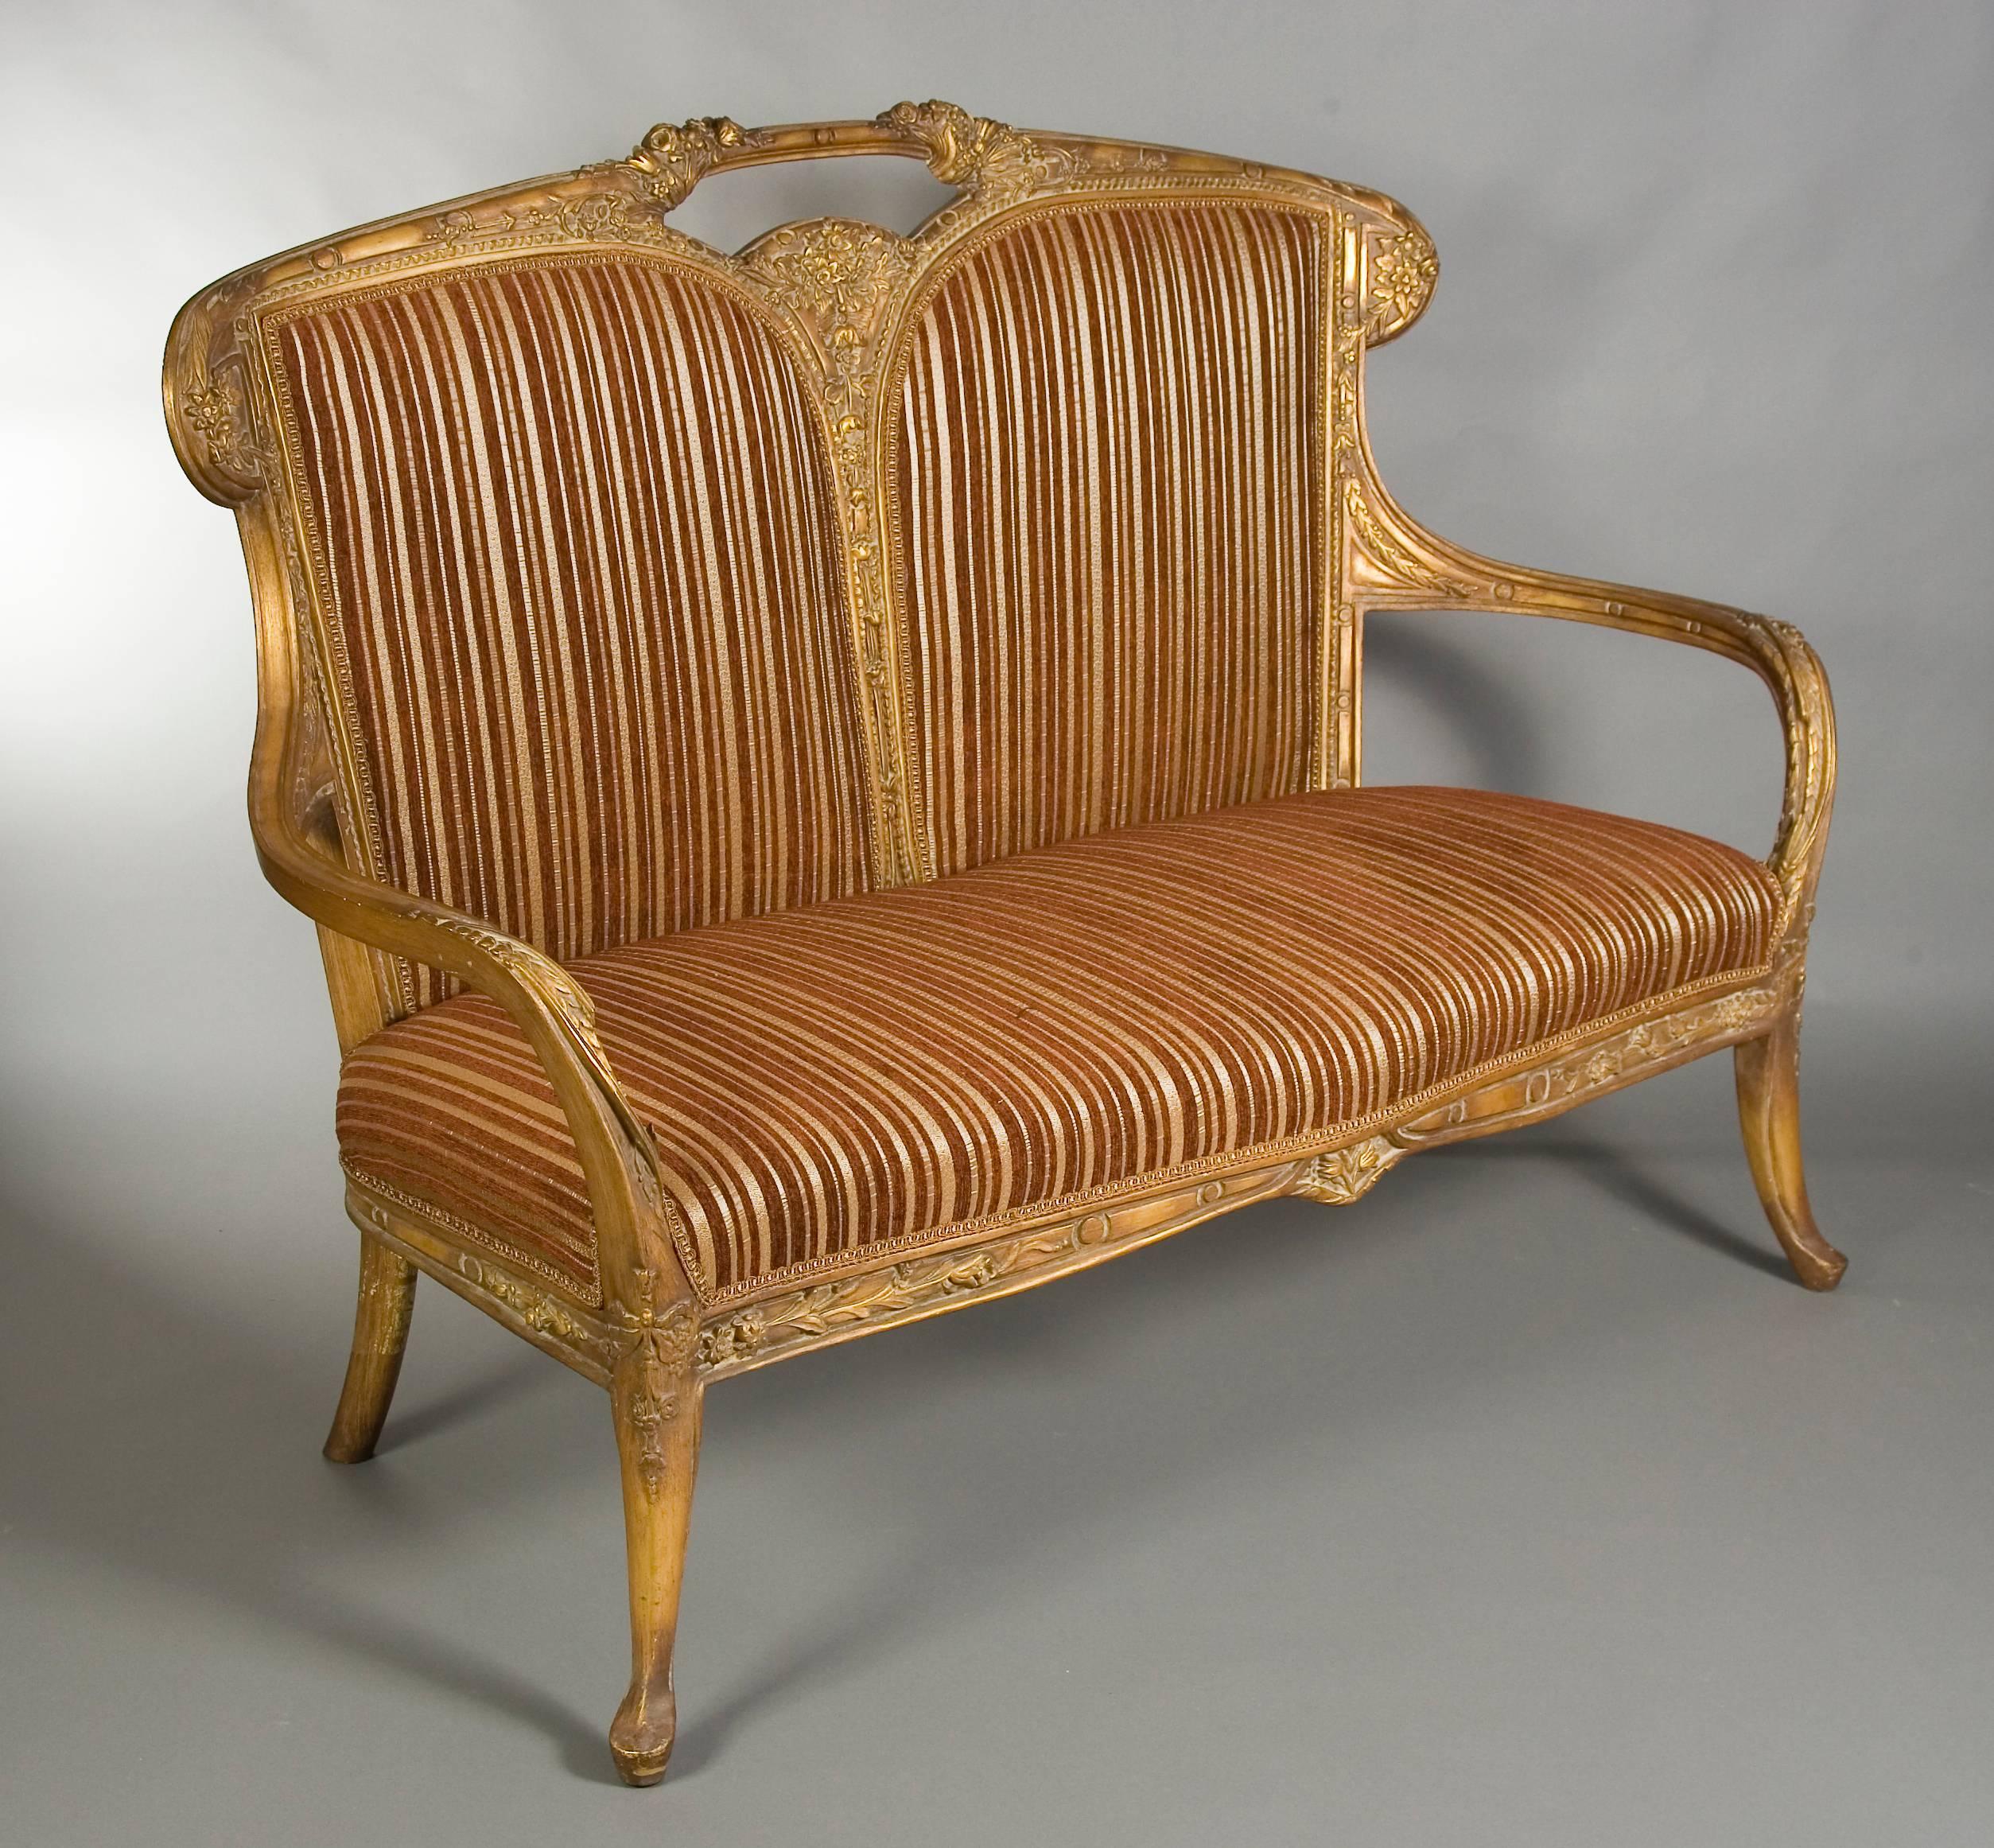 Solid beechwood with carvings. On slightly bent and twisted, shaped legs. Slightly carved and cambered frame. Both-sided armrests turned and profiled. The legs are slightly turned outwards and have beautiful wood carving. Curved backrest with middle